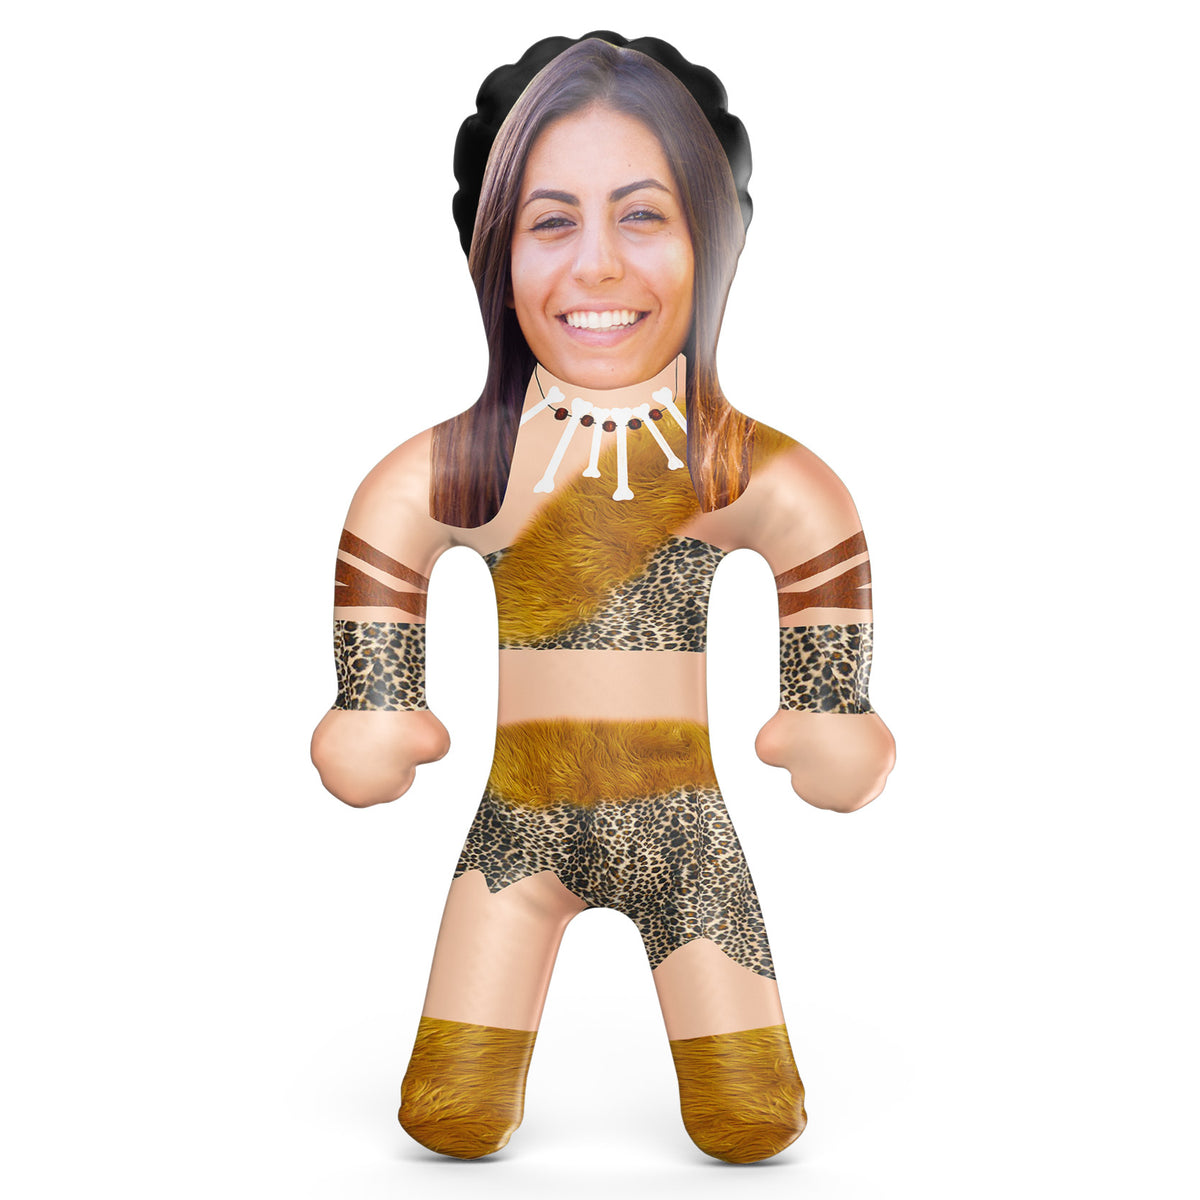 Cavewoman Inflatable Doll - Cavewoman Blow Up Doll